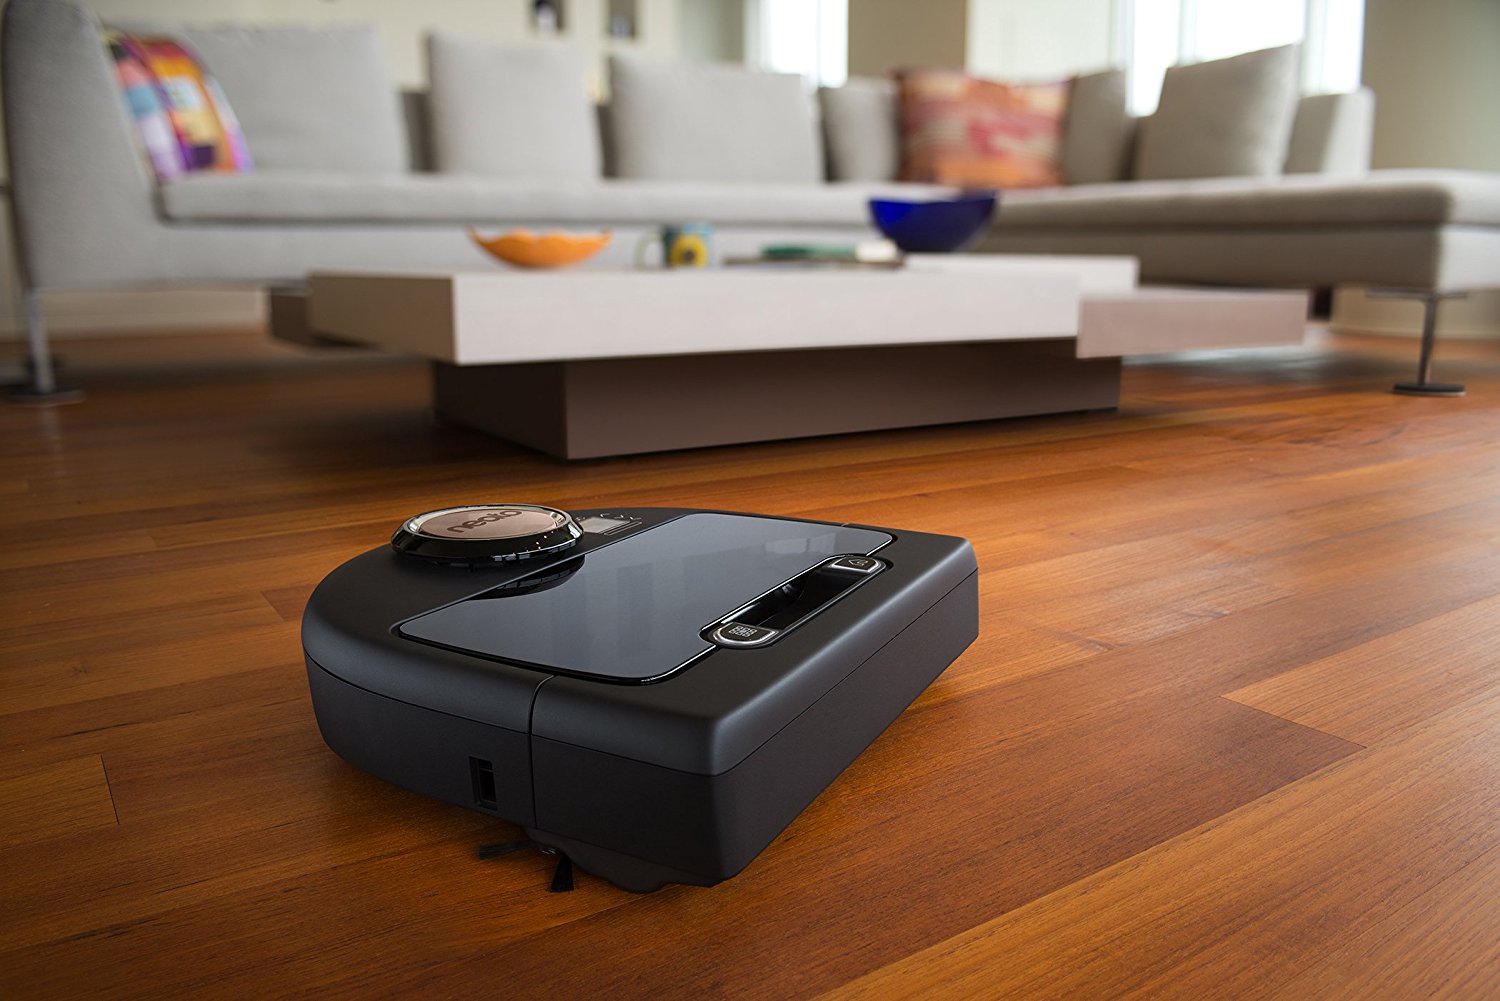 Neato-Botvac-Connected-Wi-Fi-Enabled-Robotic-cleaner